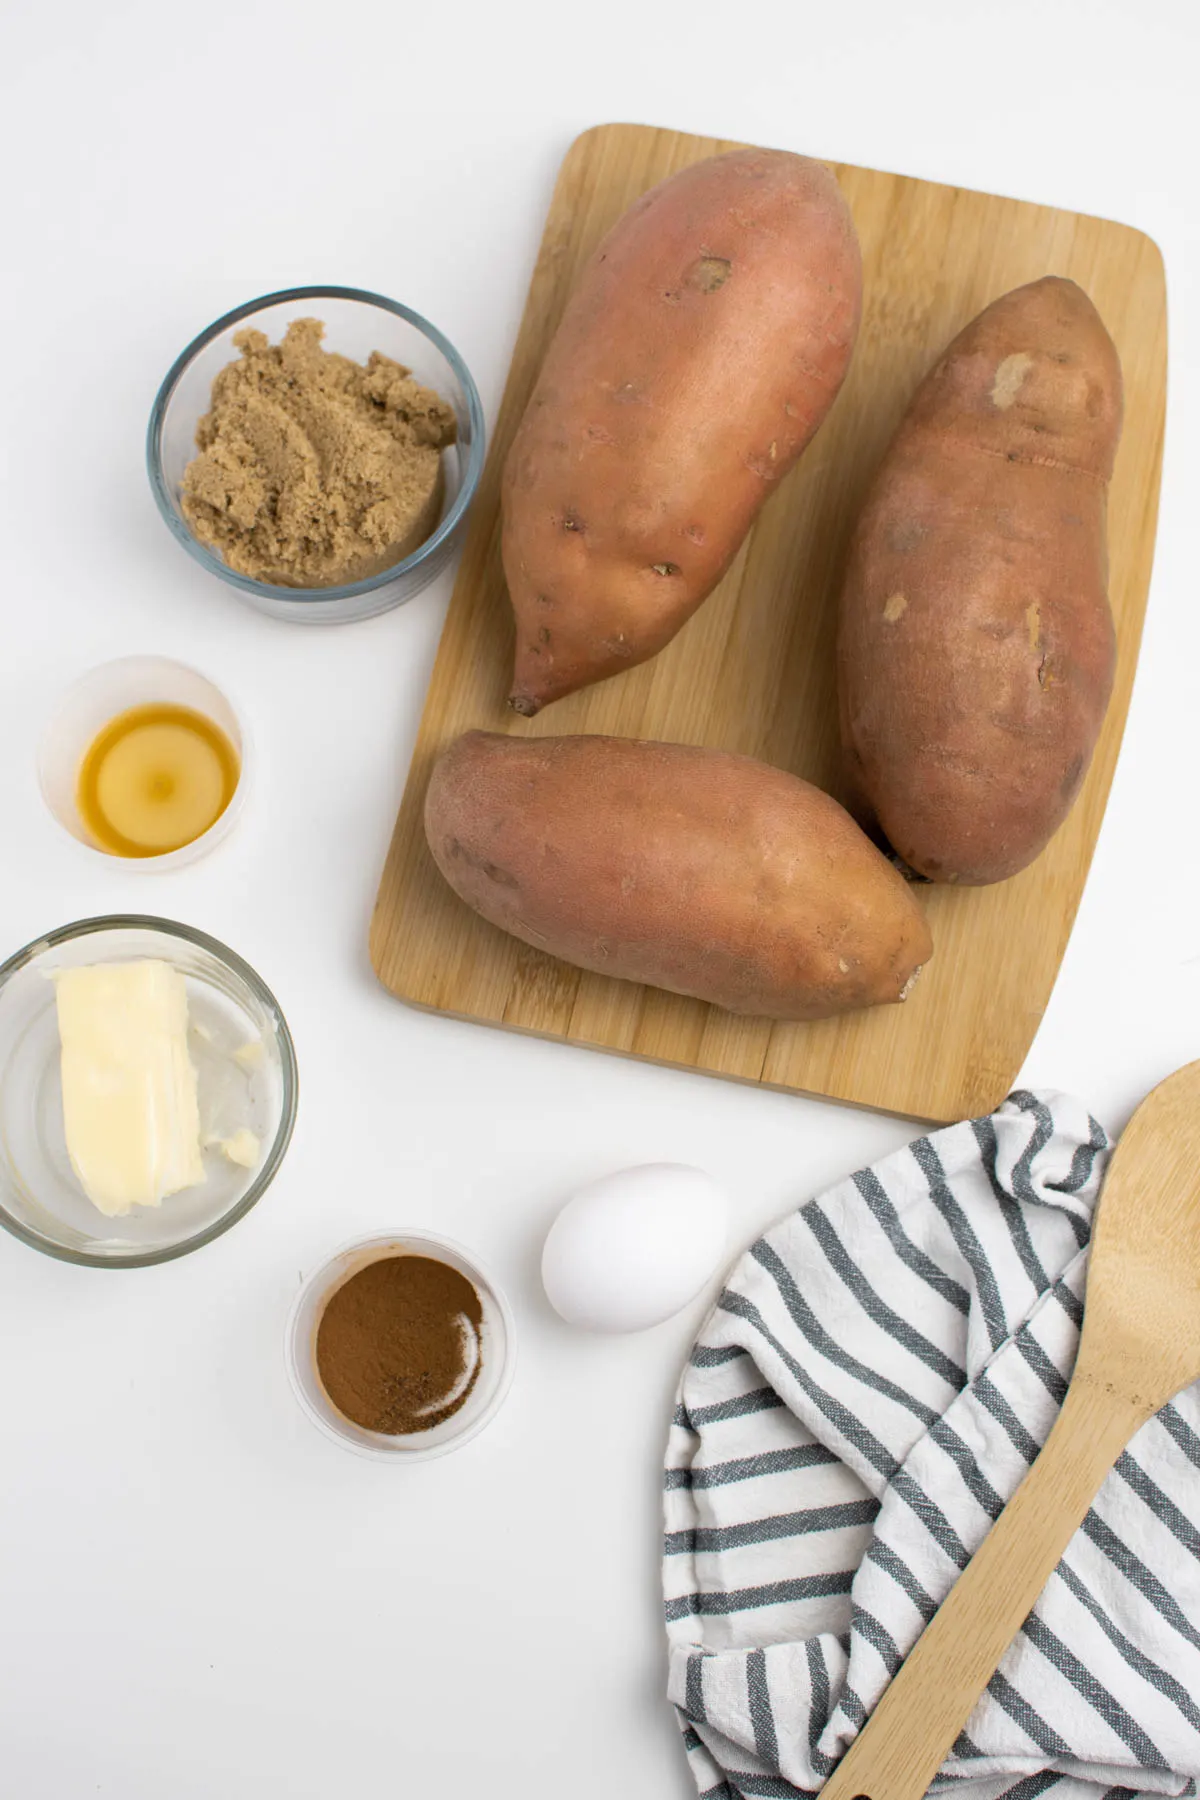 Sweet potato crunch ingredients including brown sugar, butter, egg, and sweet potatoes.